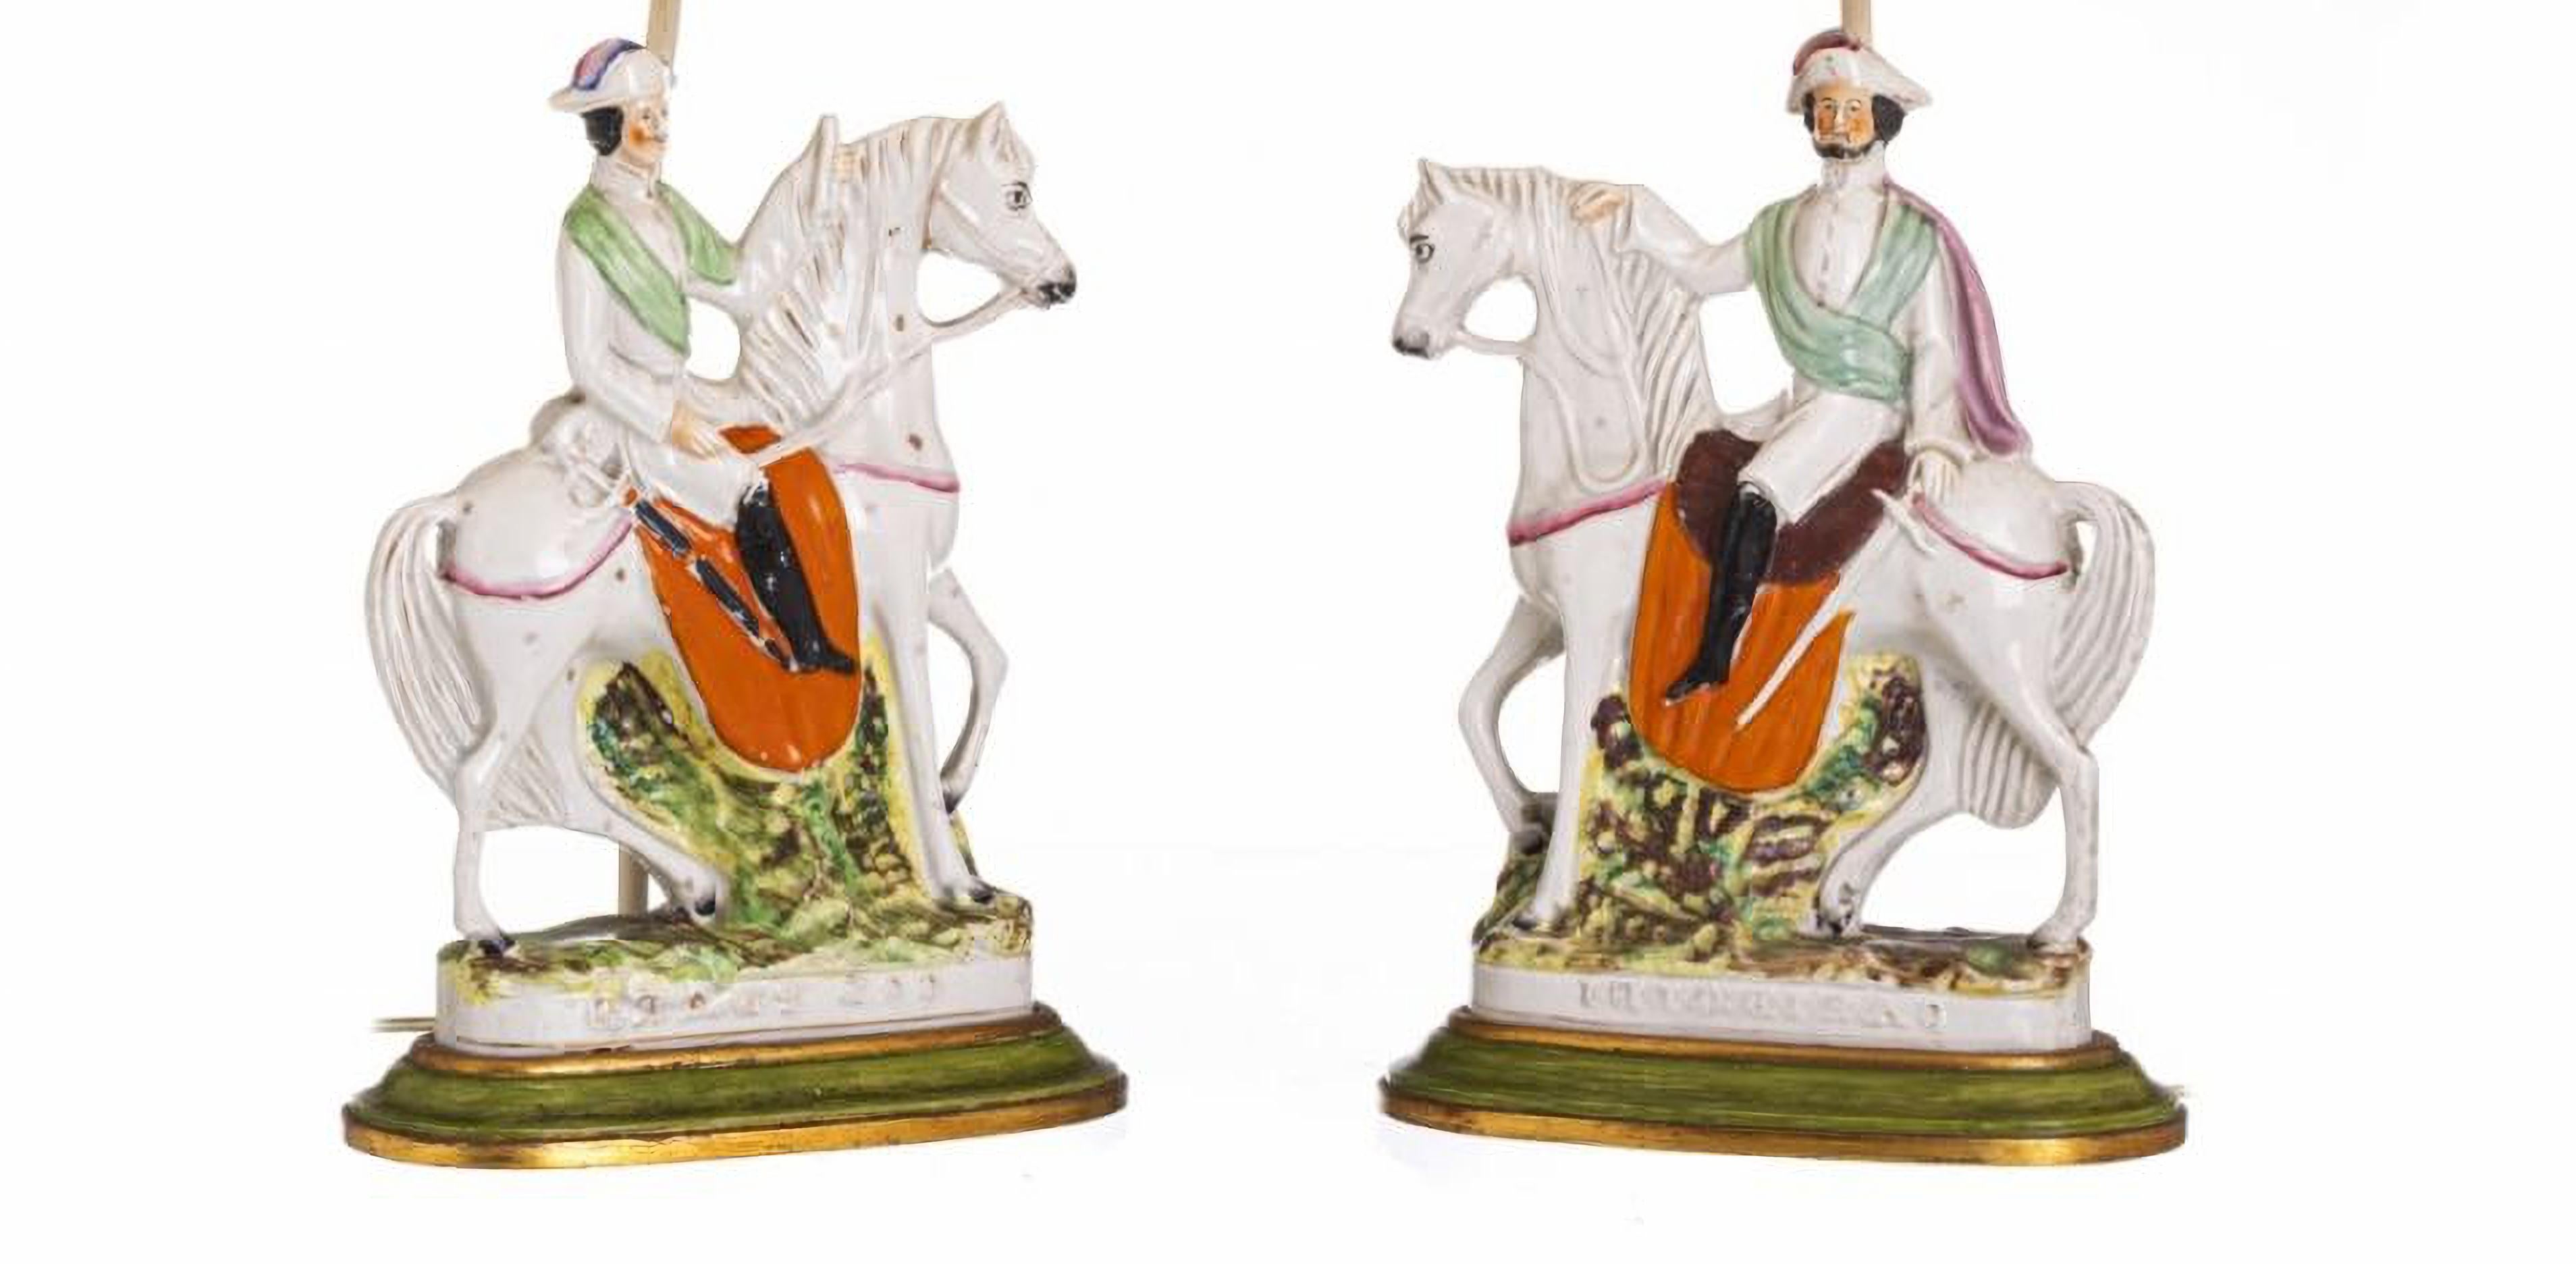 Coronel Peard & Garibaldi 19th century
Two sculptures in English faience,
Staffordshire manufacture.
Polychrome and gilded decoration, resting on bases in painted and gilded wood.
Adapted to lamps, with fabric lampshades.
Dec. Height: (total)